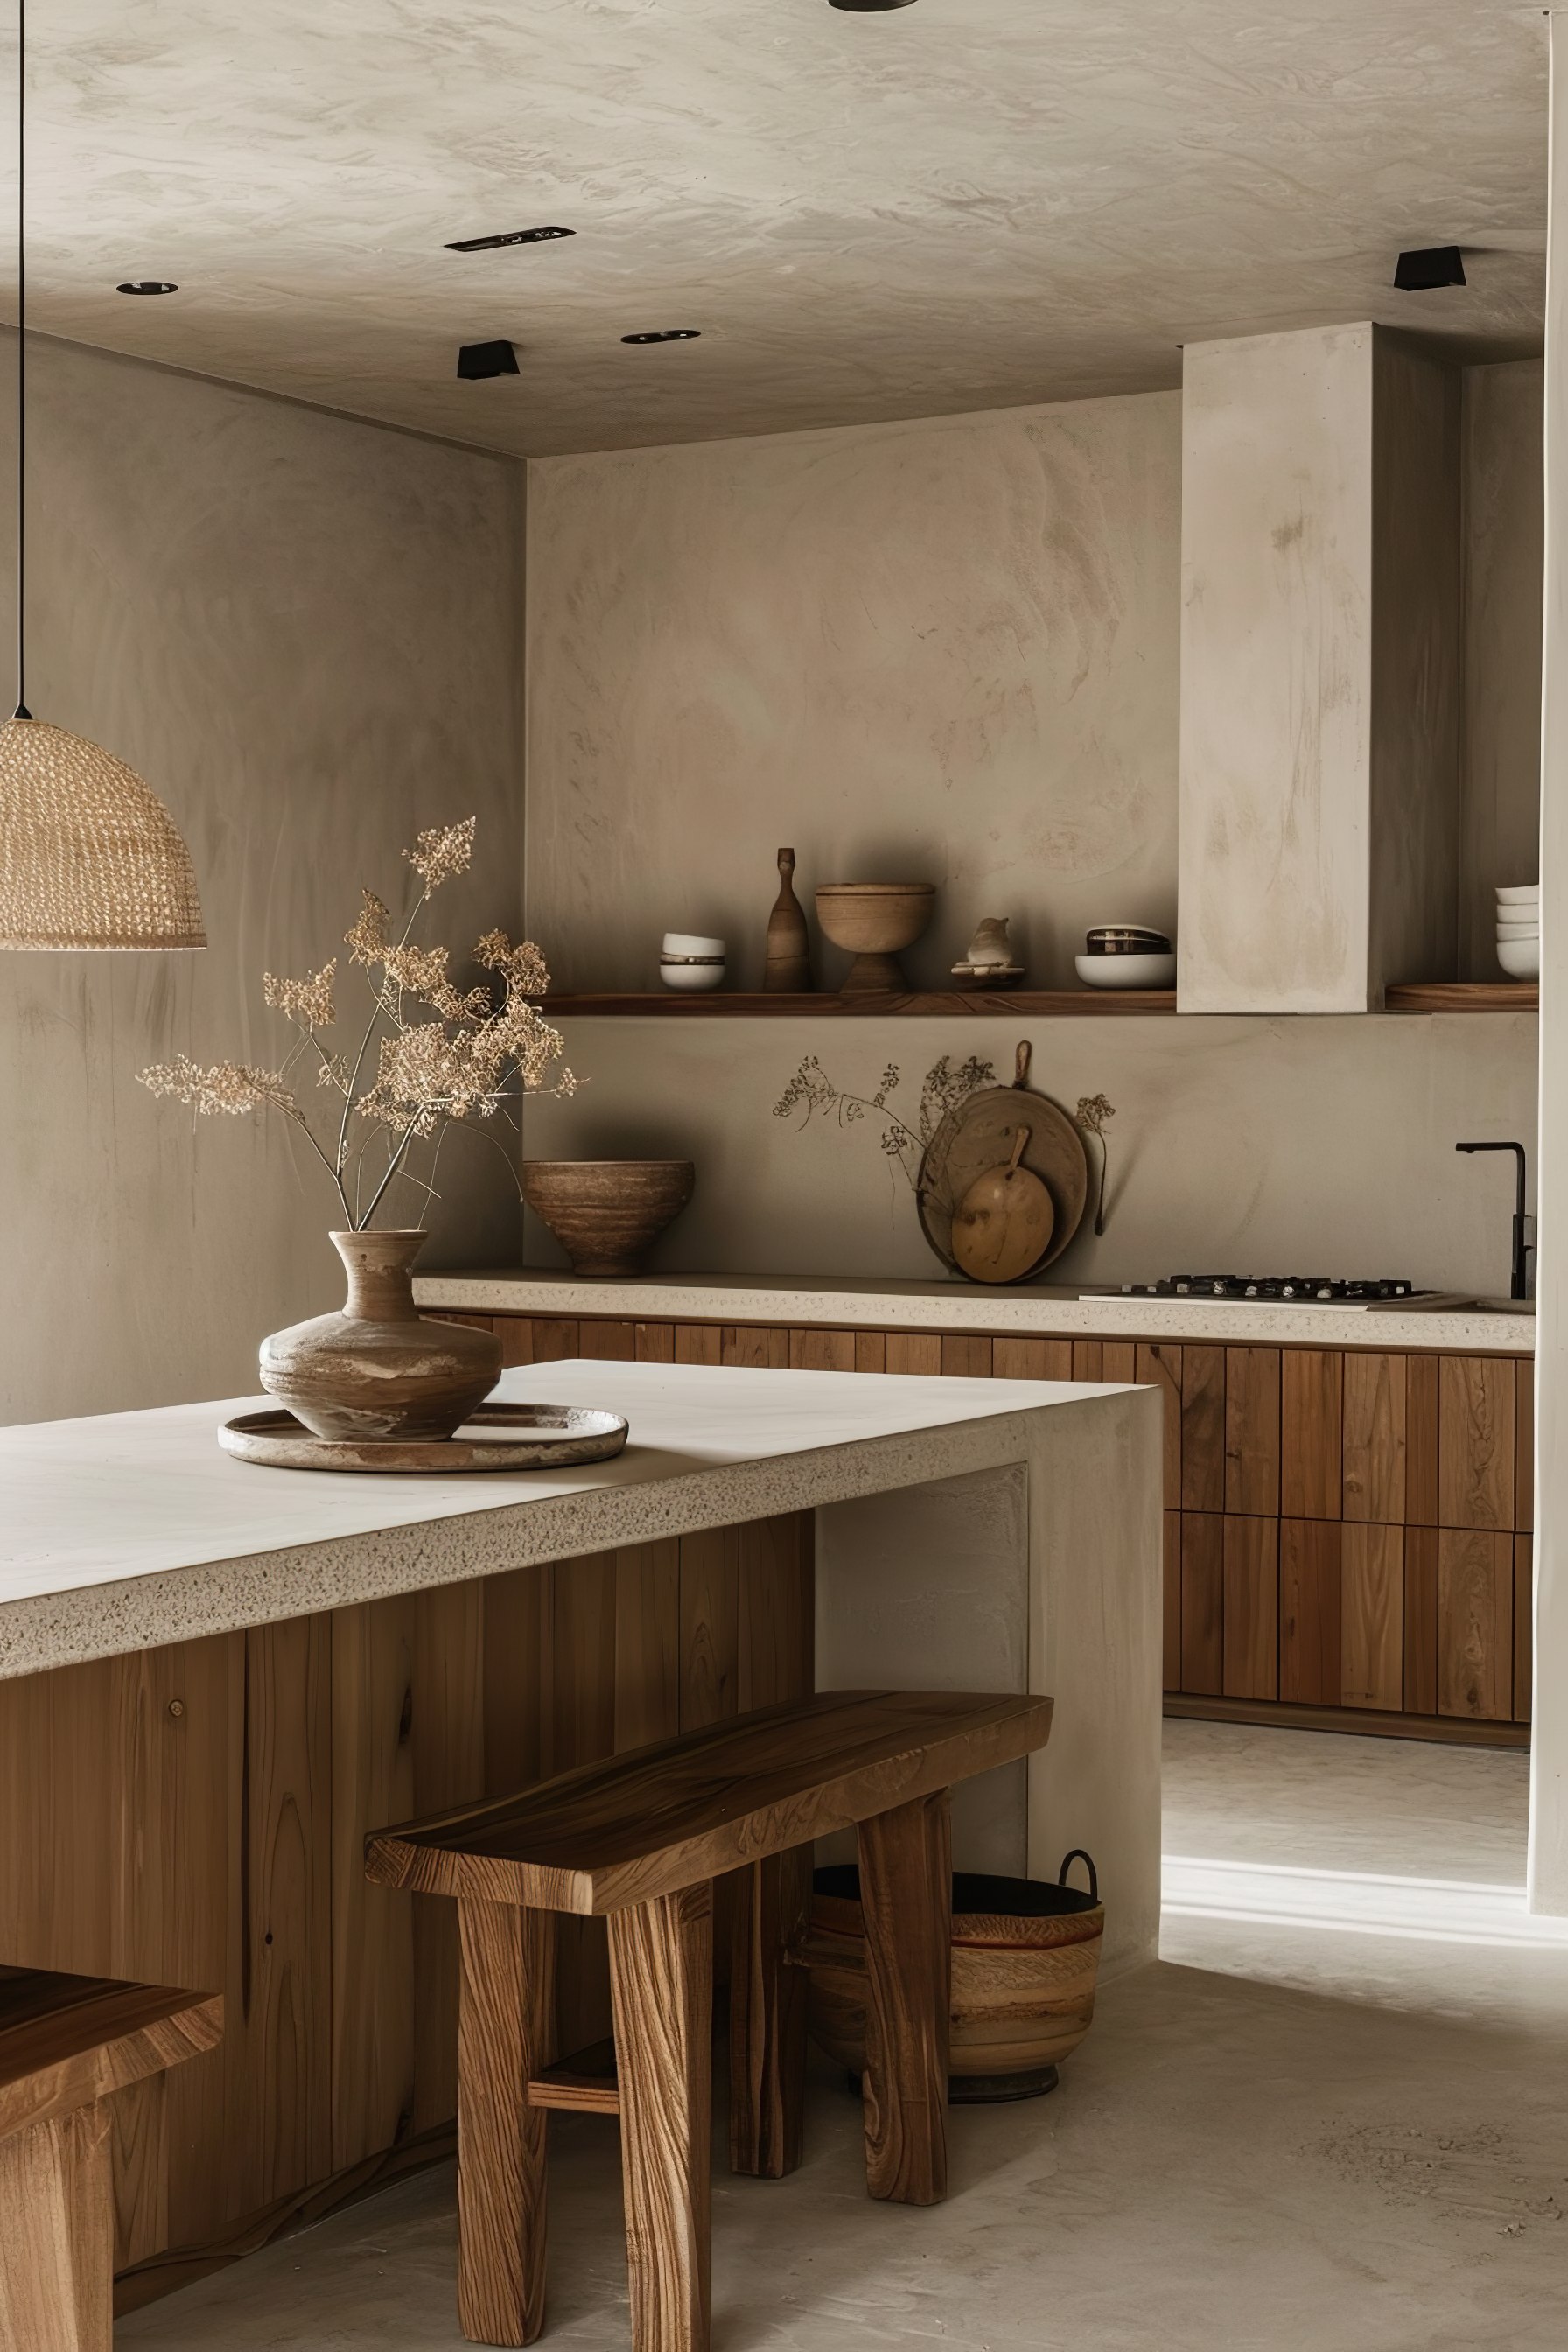 A modern kitchen with minimalistic wooden furniture and neutral tones, decorated with dry plants and ceramic dishes.